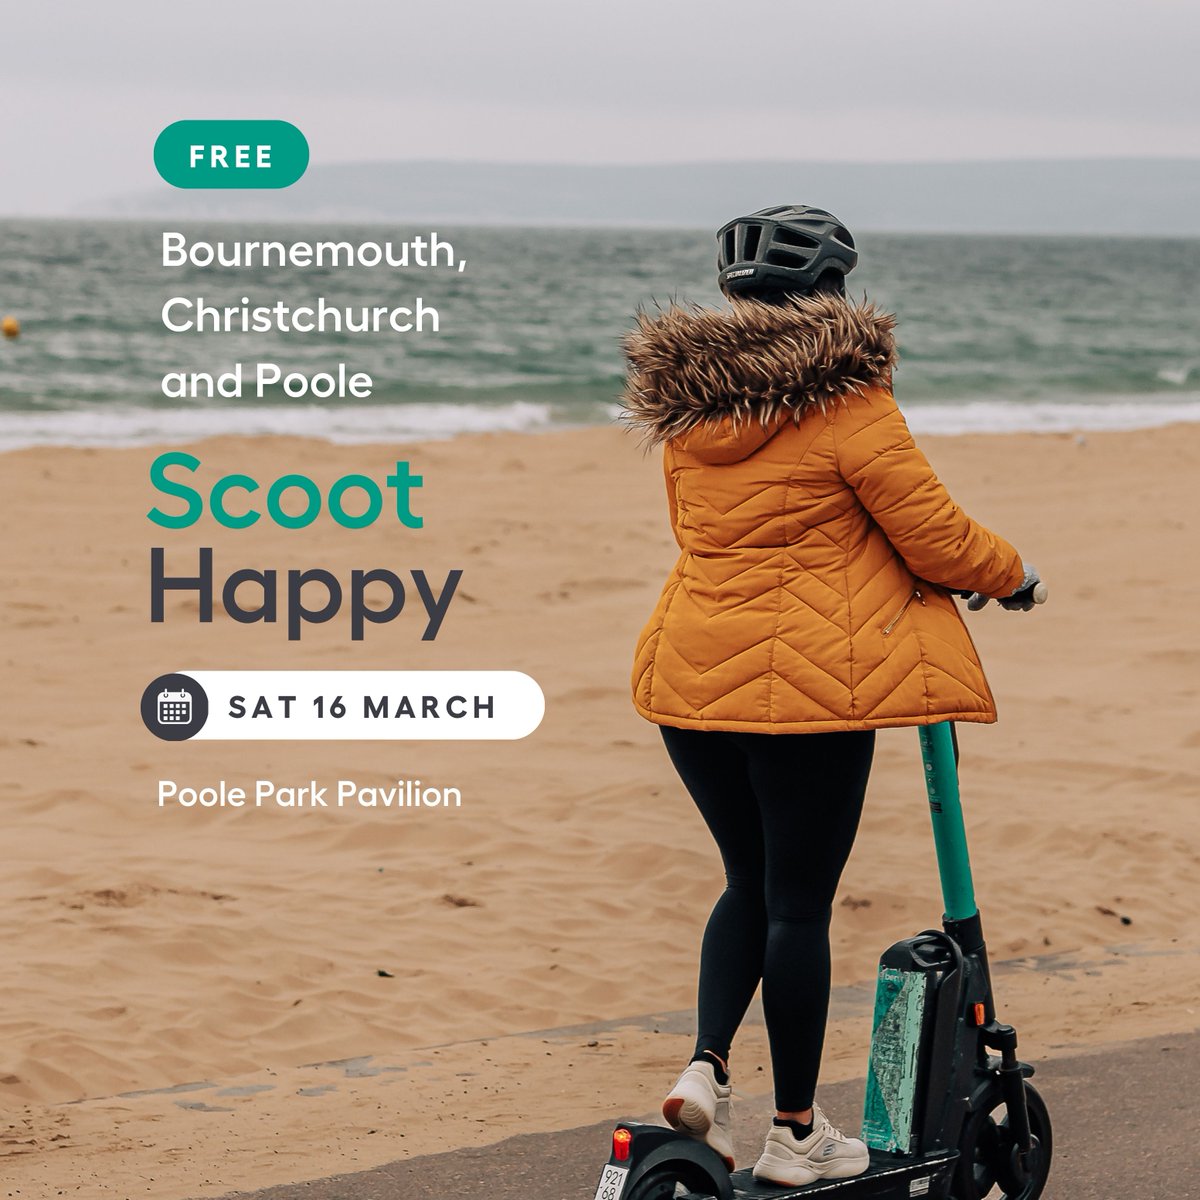 This time next week you could be brushing up your e-scooter skills for the year ahead 😎 Plus all participants get 200 free minutes to spend with Beryl. 🛴 Don't miss out! Sign up here: eventbrite.co.uk/o/beryl-335735… @BCPCouncil #Bournemouth #Dorset #Escooters